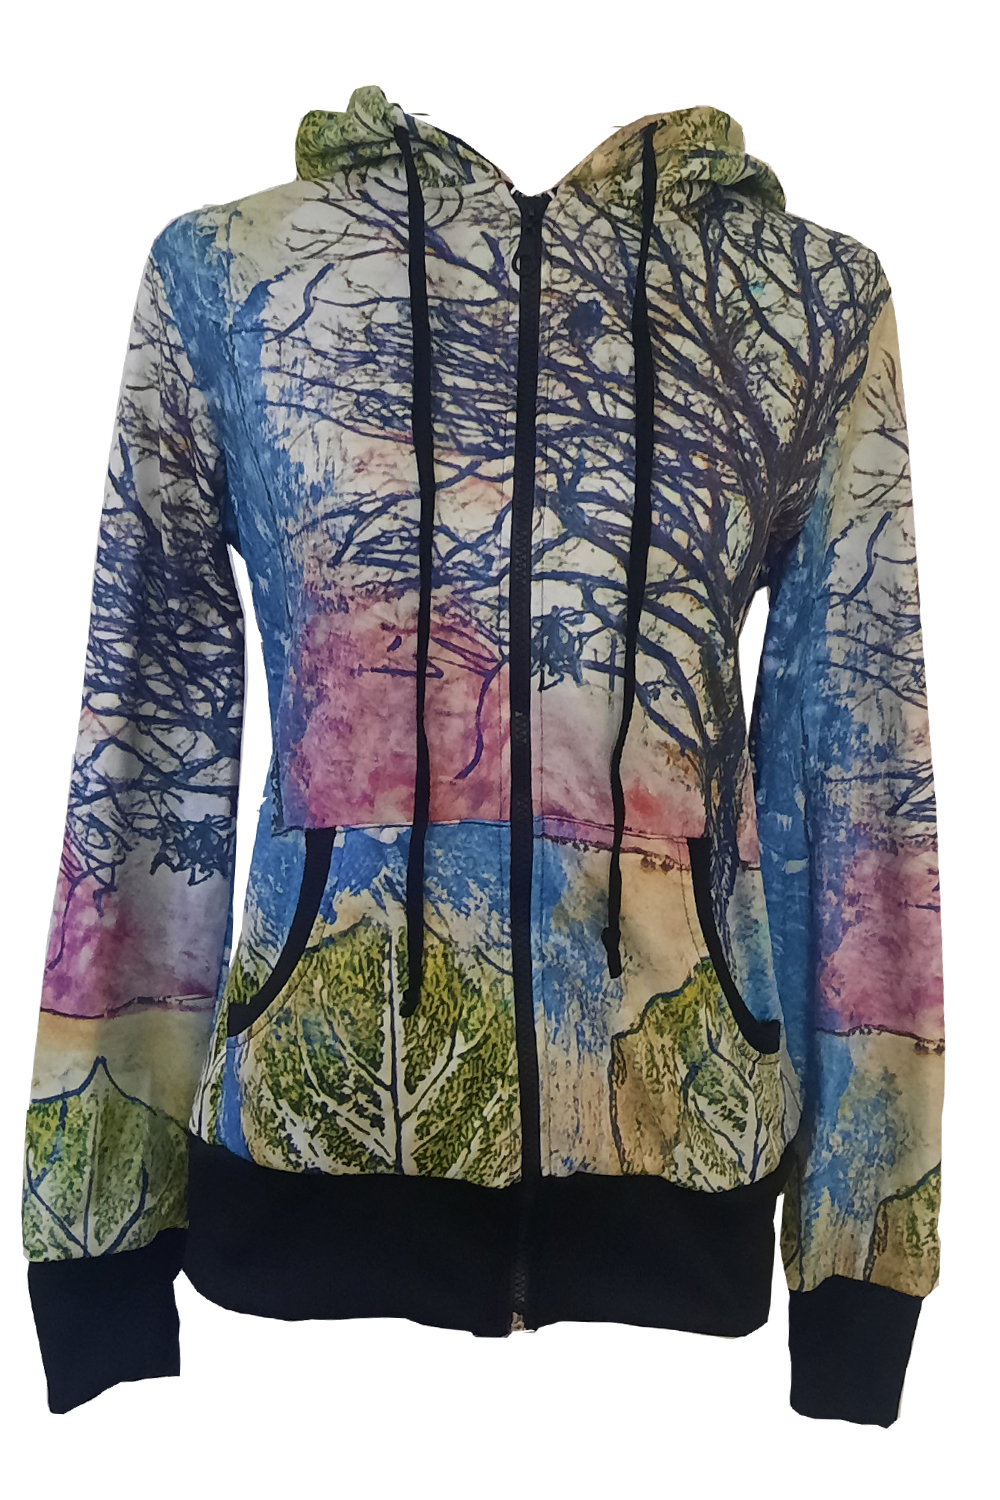 Shading Branches Women's Winter Jacket